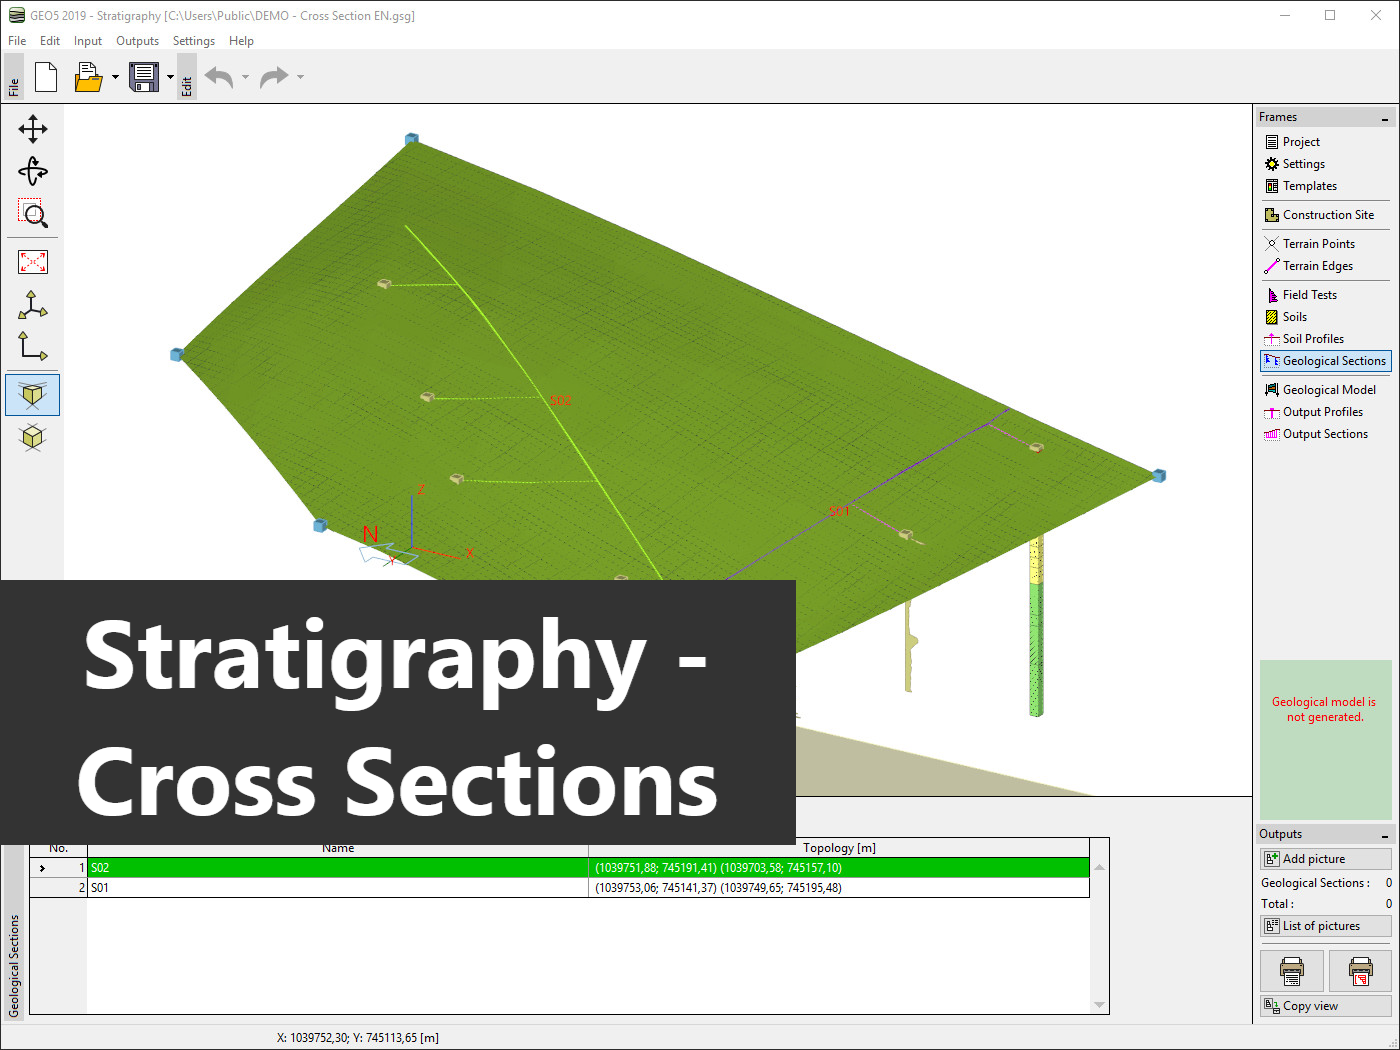 StratigraphyCrossSections